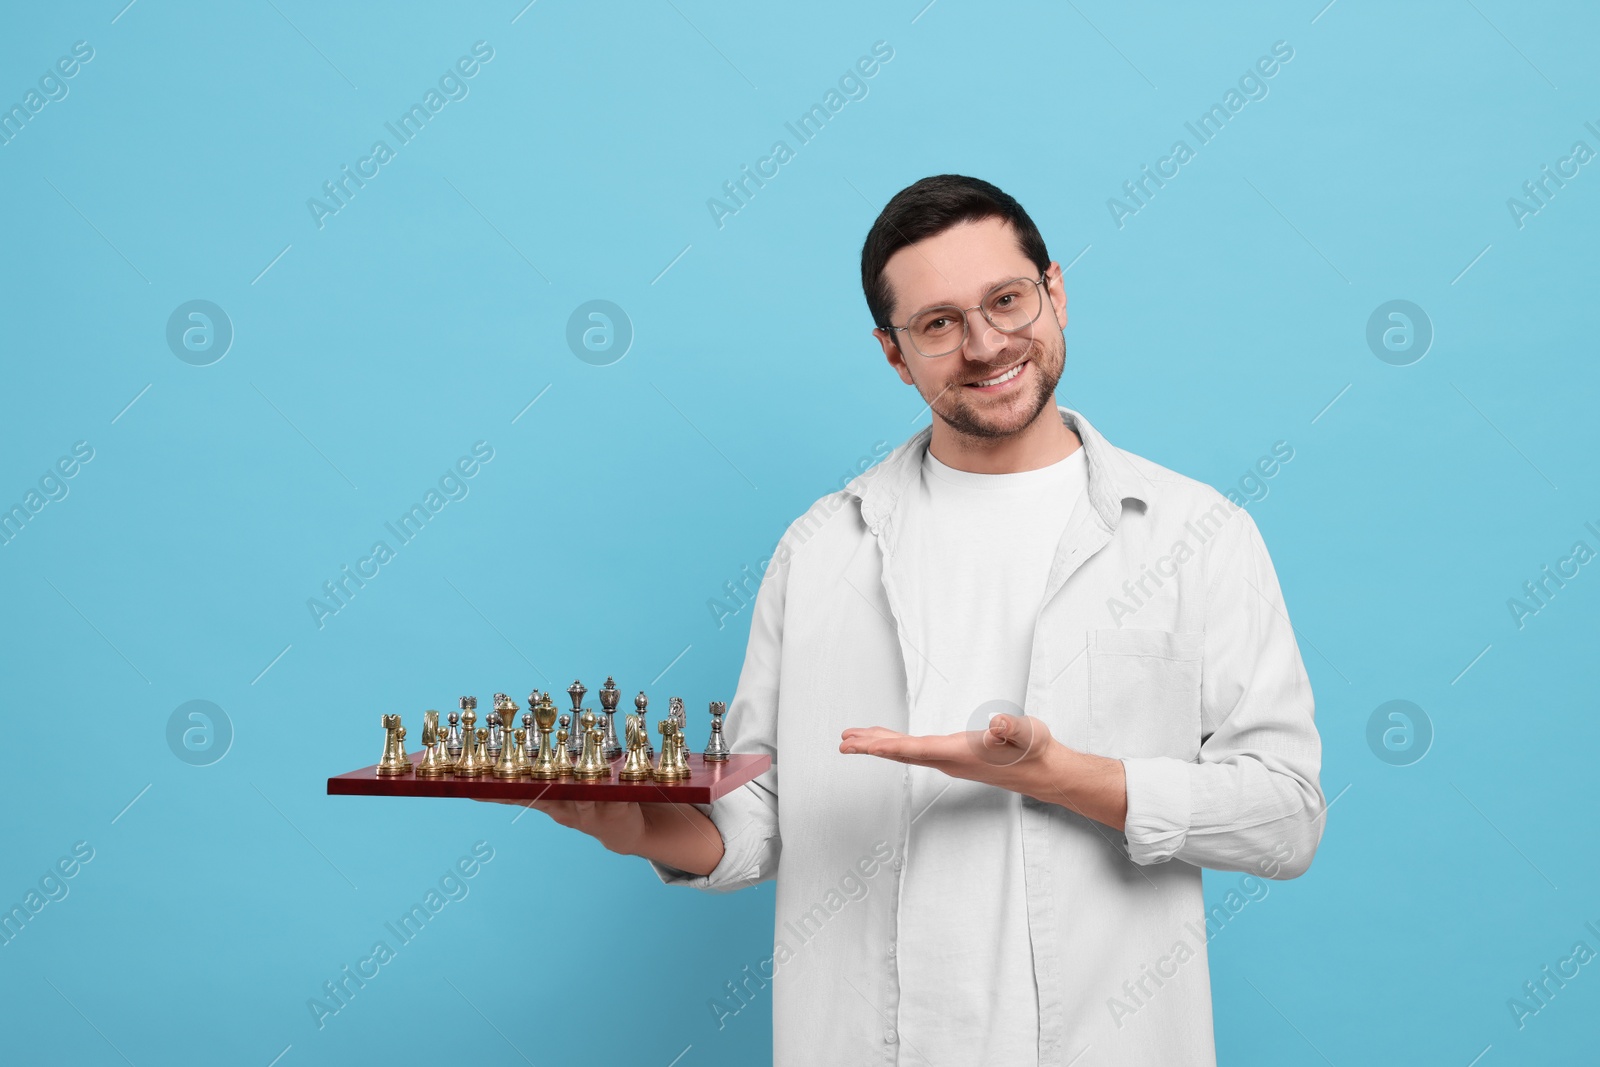 Photo of Handsome man showing chessboard with game pieces on light blue background